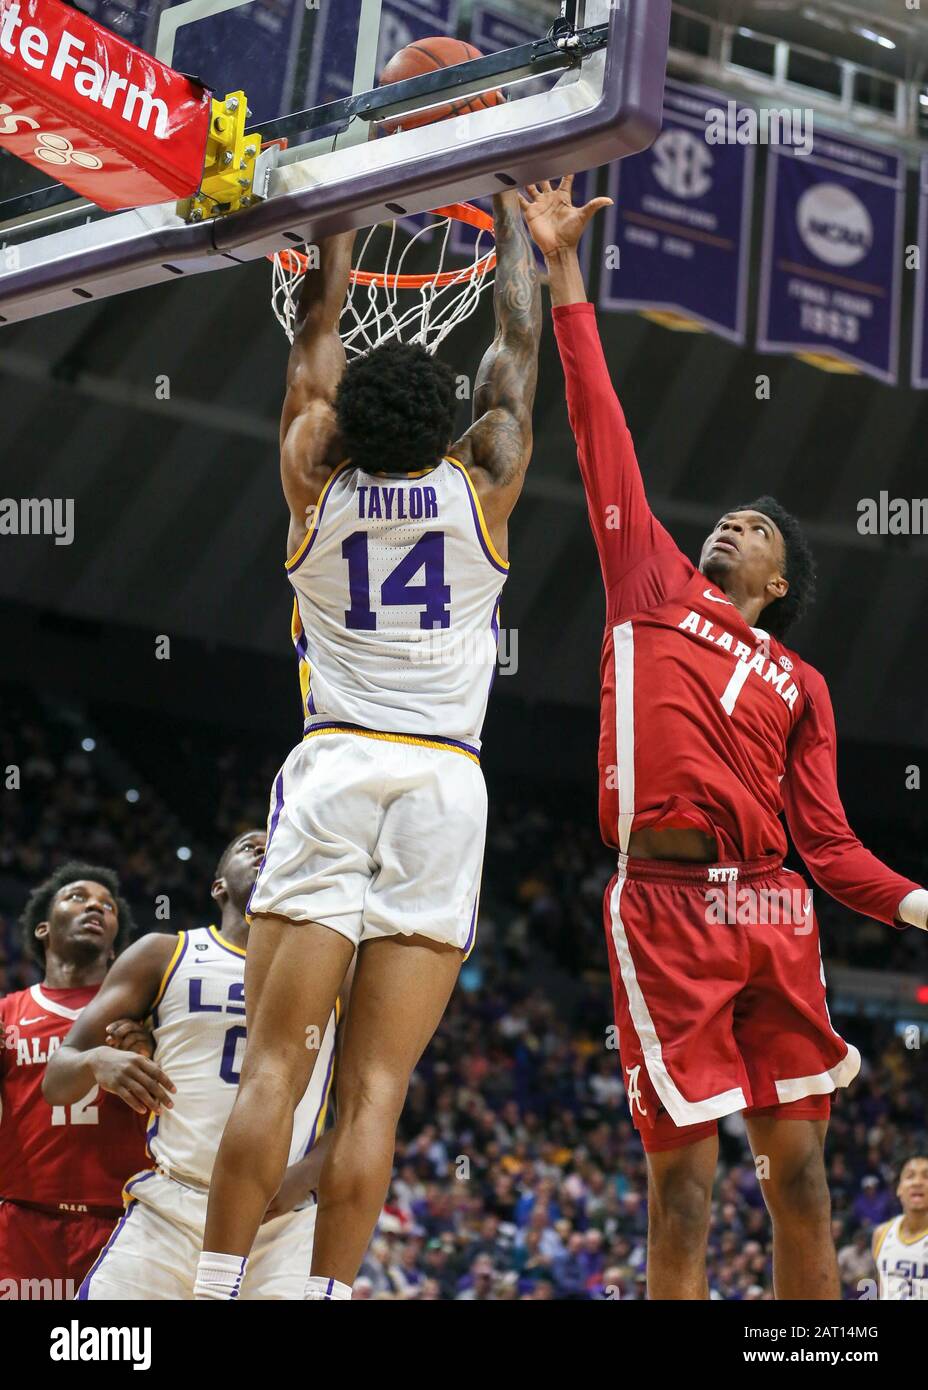 Baton Rouge, LA, USA. 29th Jan, 2020. Alabama's Herbert Jones (1) tries to block the shot of LSU's Marlon Taylor (14) during NCAA Basketball action between the Alabama Crimson Tide and the LSU Tigers at the Pete Maravich Assembly Center in Baton Rouge, LA. Jonathan Mailhes/CSM/Alamy Live News Stock Photo